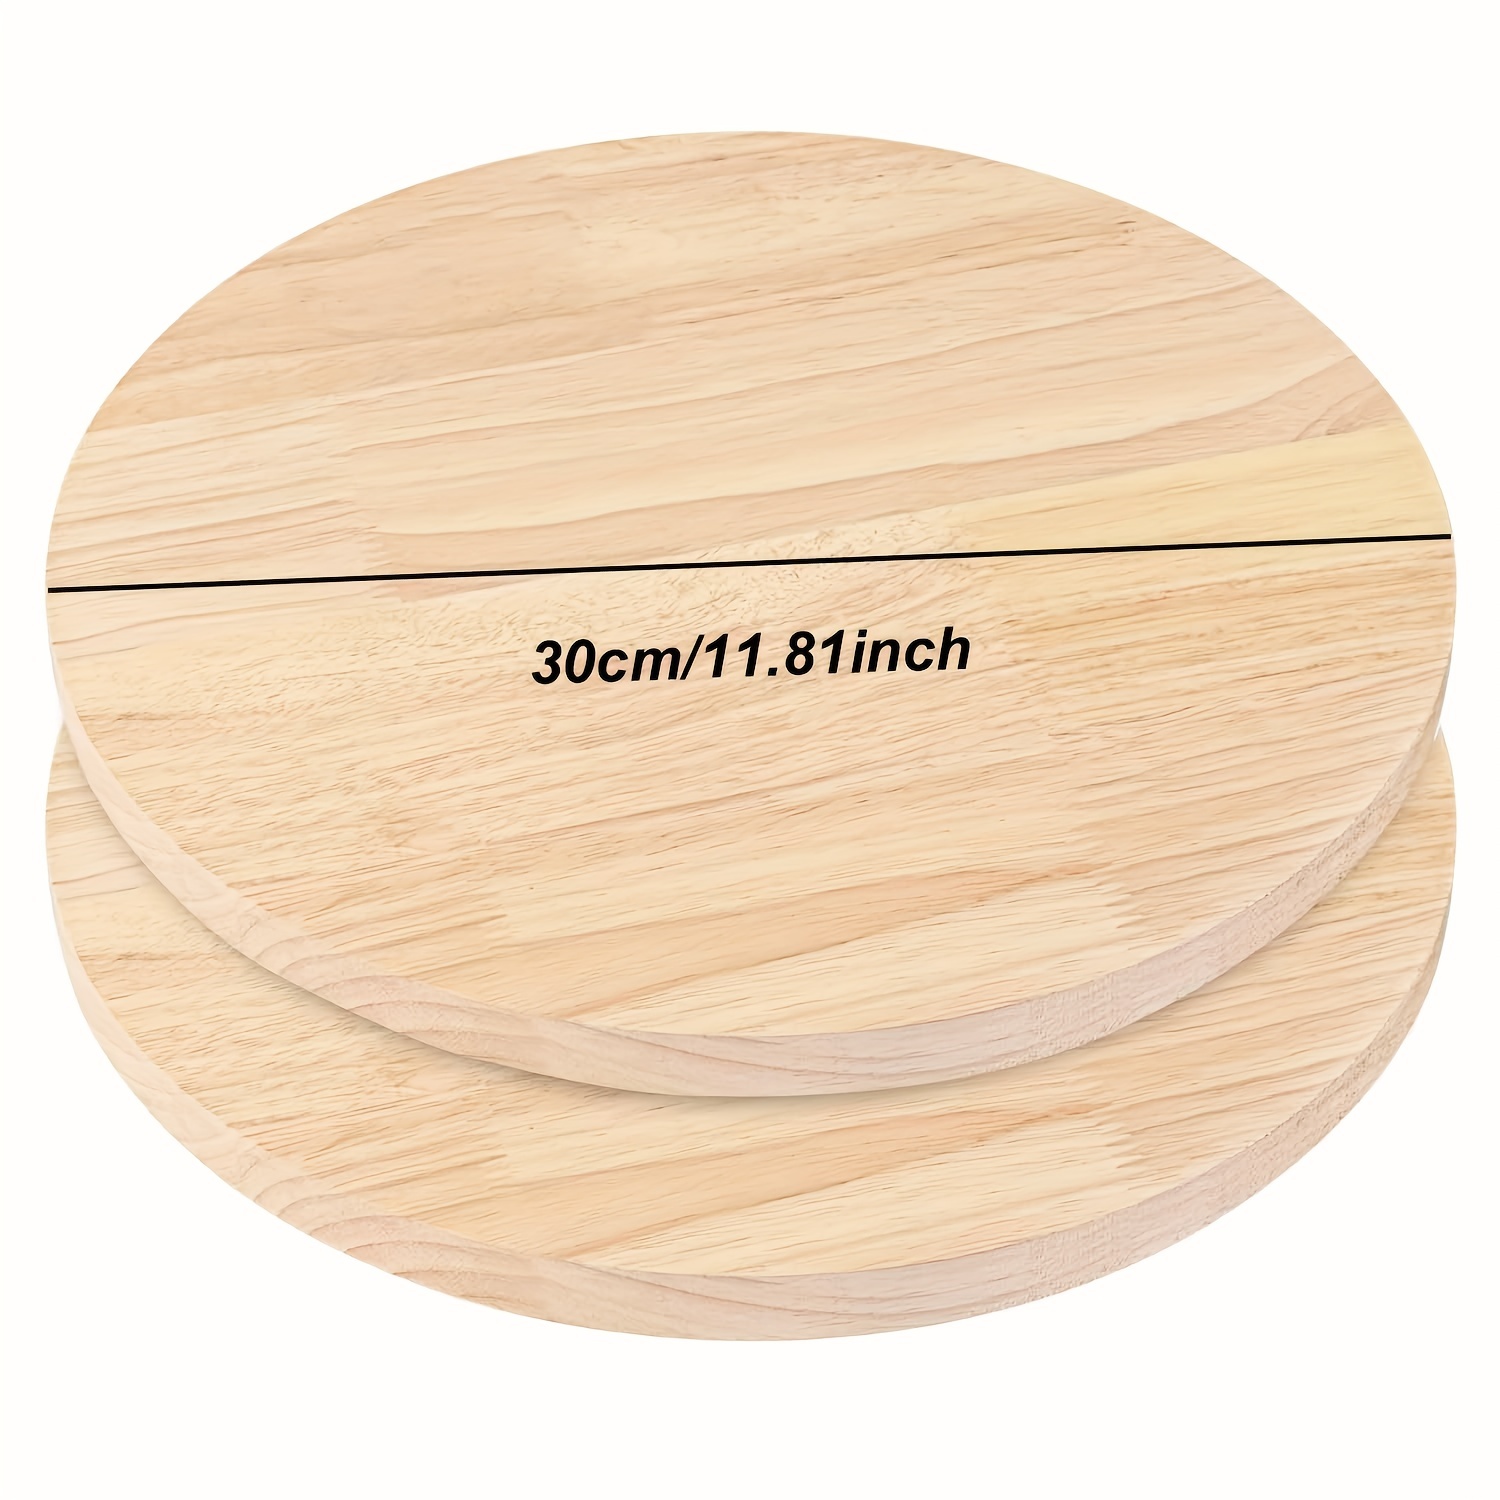 Oval Wooden Plaque, Unfinished Natural Pine Wood plaque, Great for